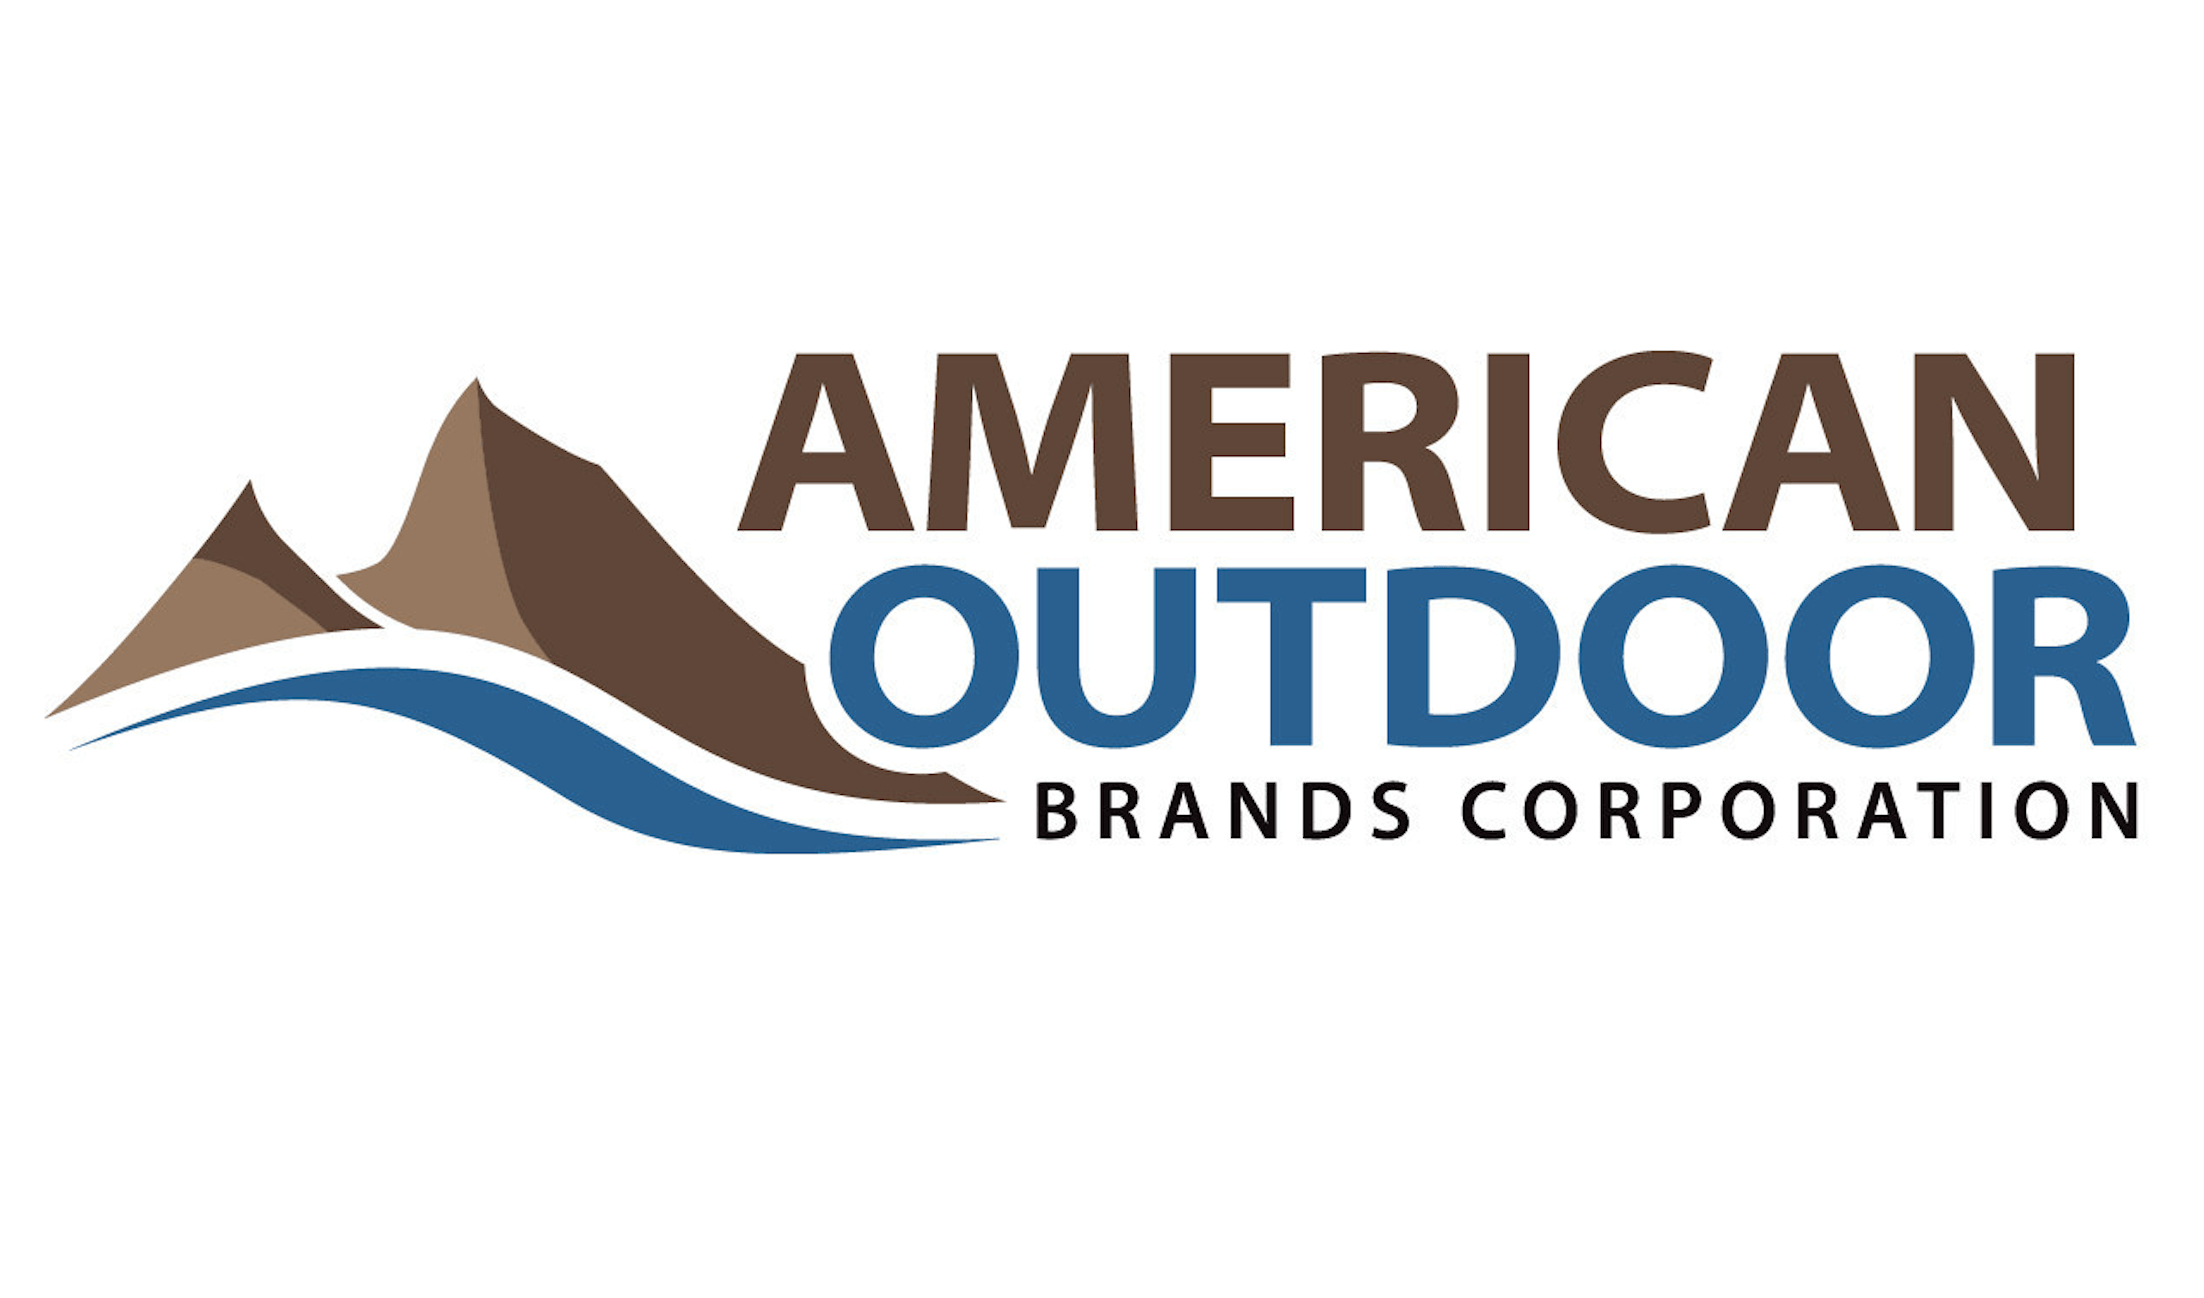 American Outdoor Company Logo - American Outdoor Brands. $AOBC Stock. Shares Shoot Lower On